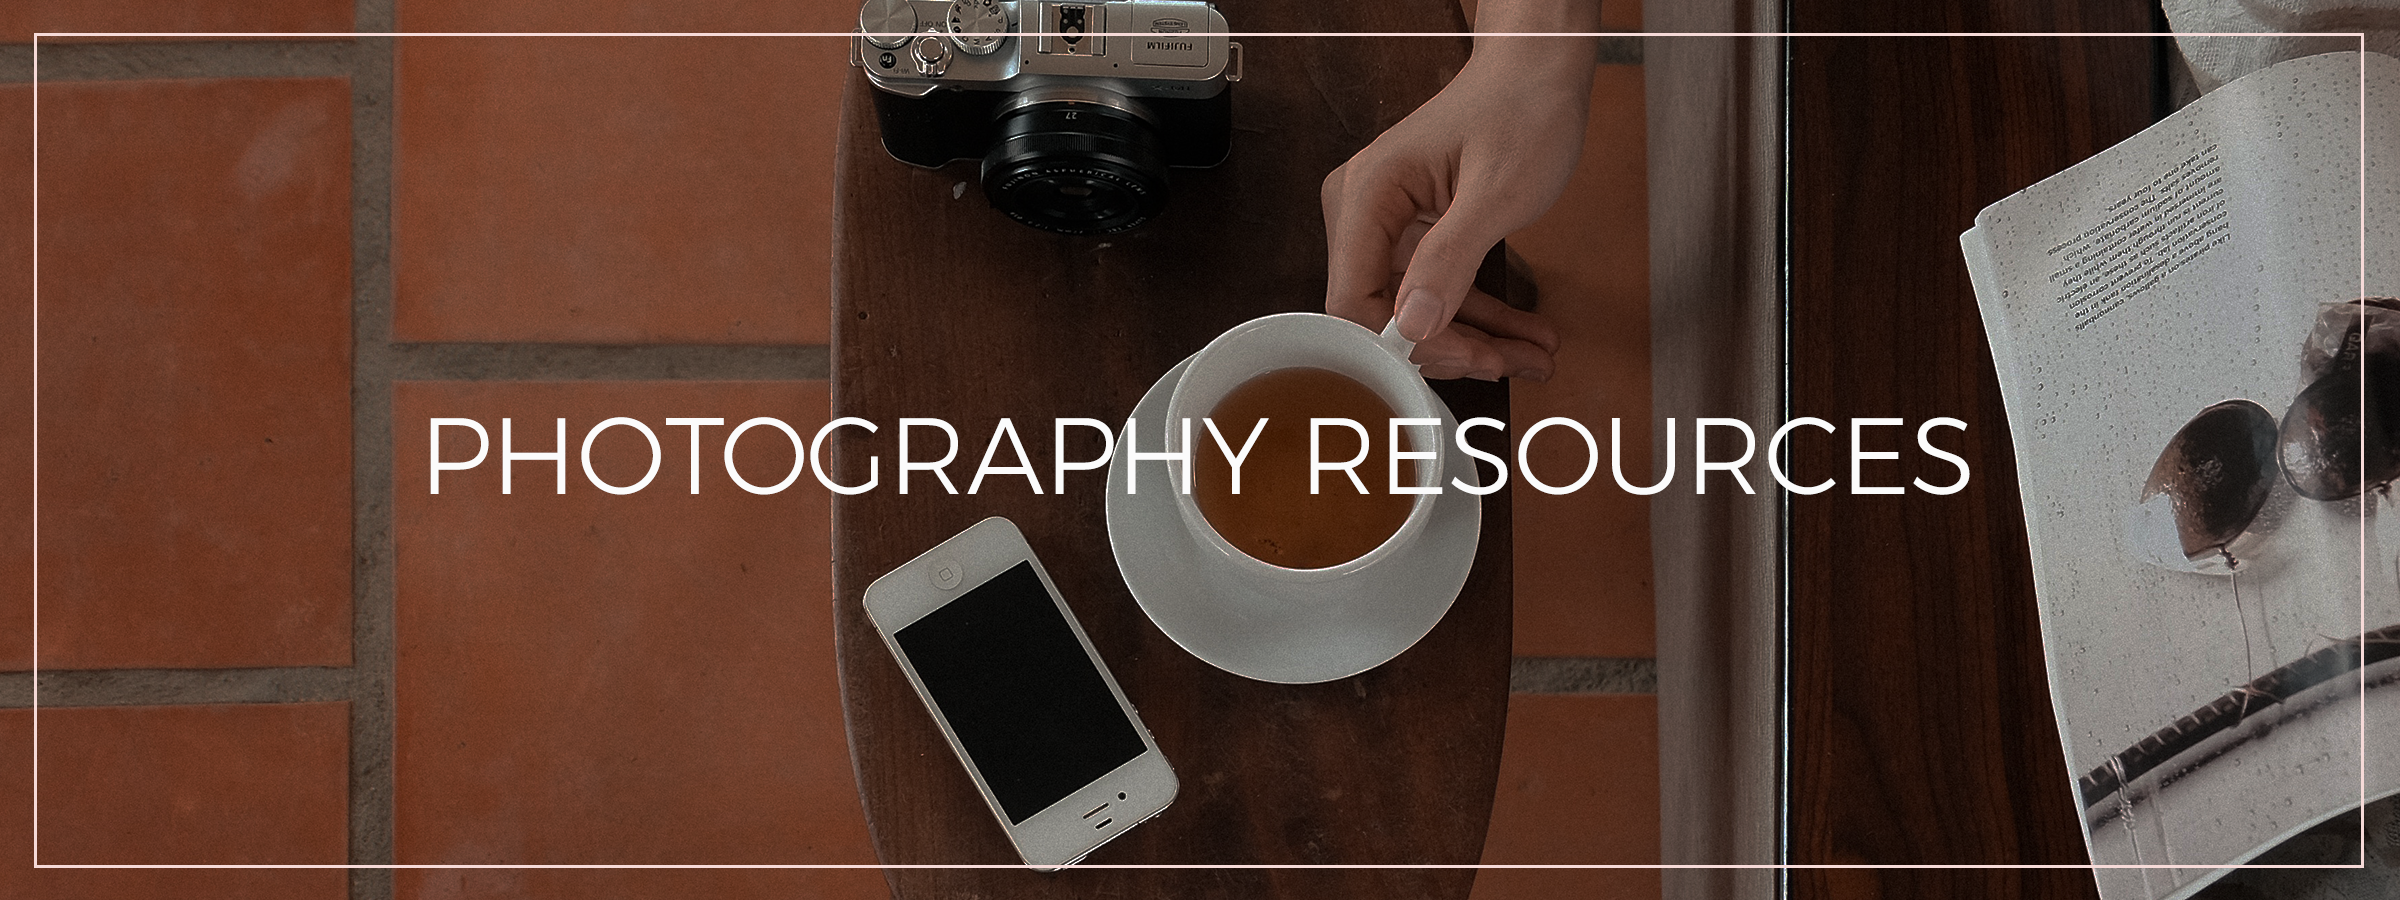 Photography resources for entrepreneurs and small business owners.